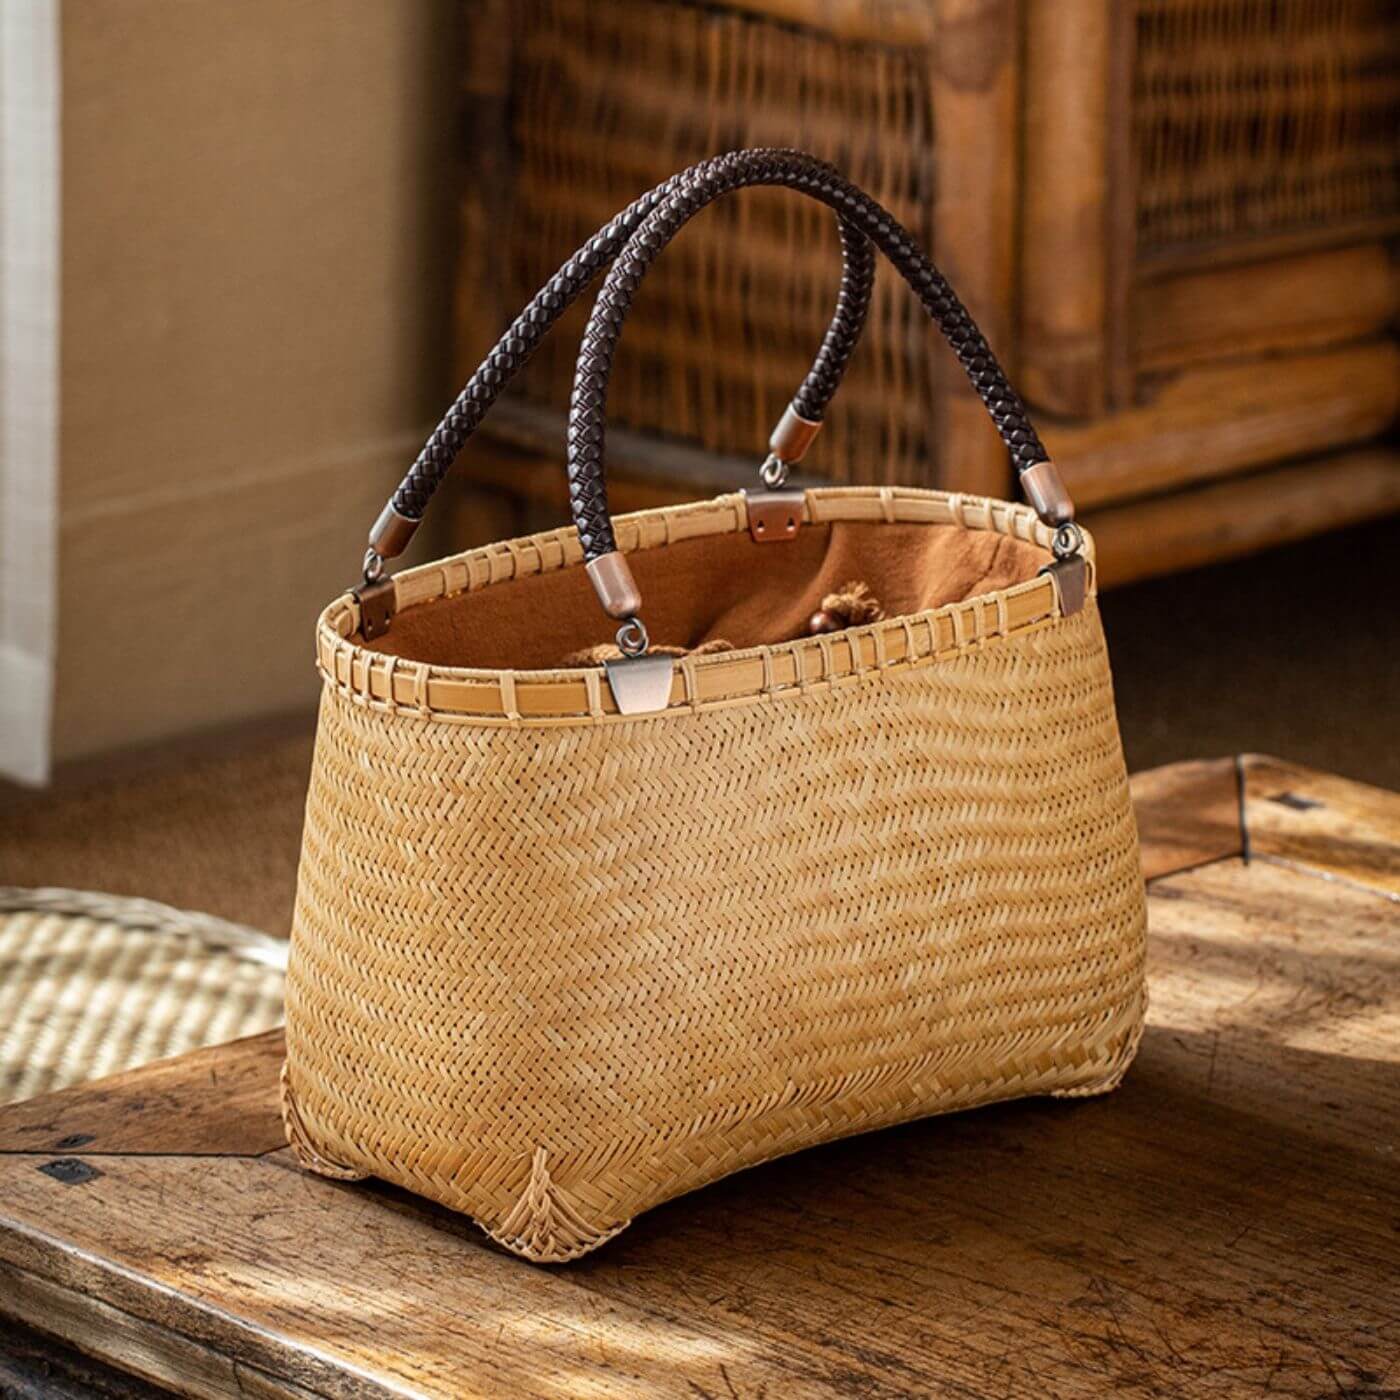 Chinese Bamboo-woven Handmade Picnic Bag100% handmade Chinese bamboo woven bags. No matter, if you want to take it to a picnic, pick flowers, or just carry your belongings when commuting, this bag, will ensure you catch the eye.